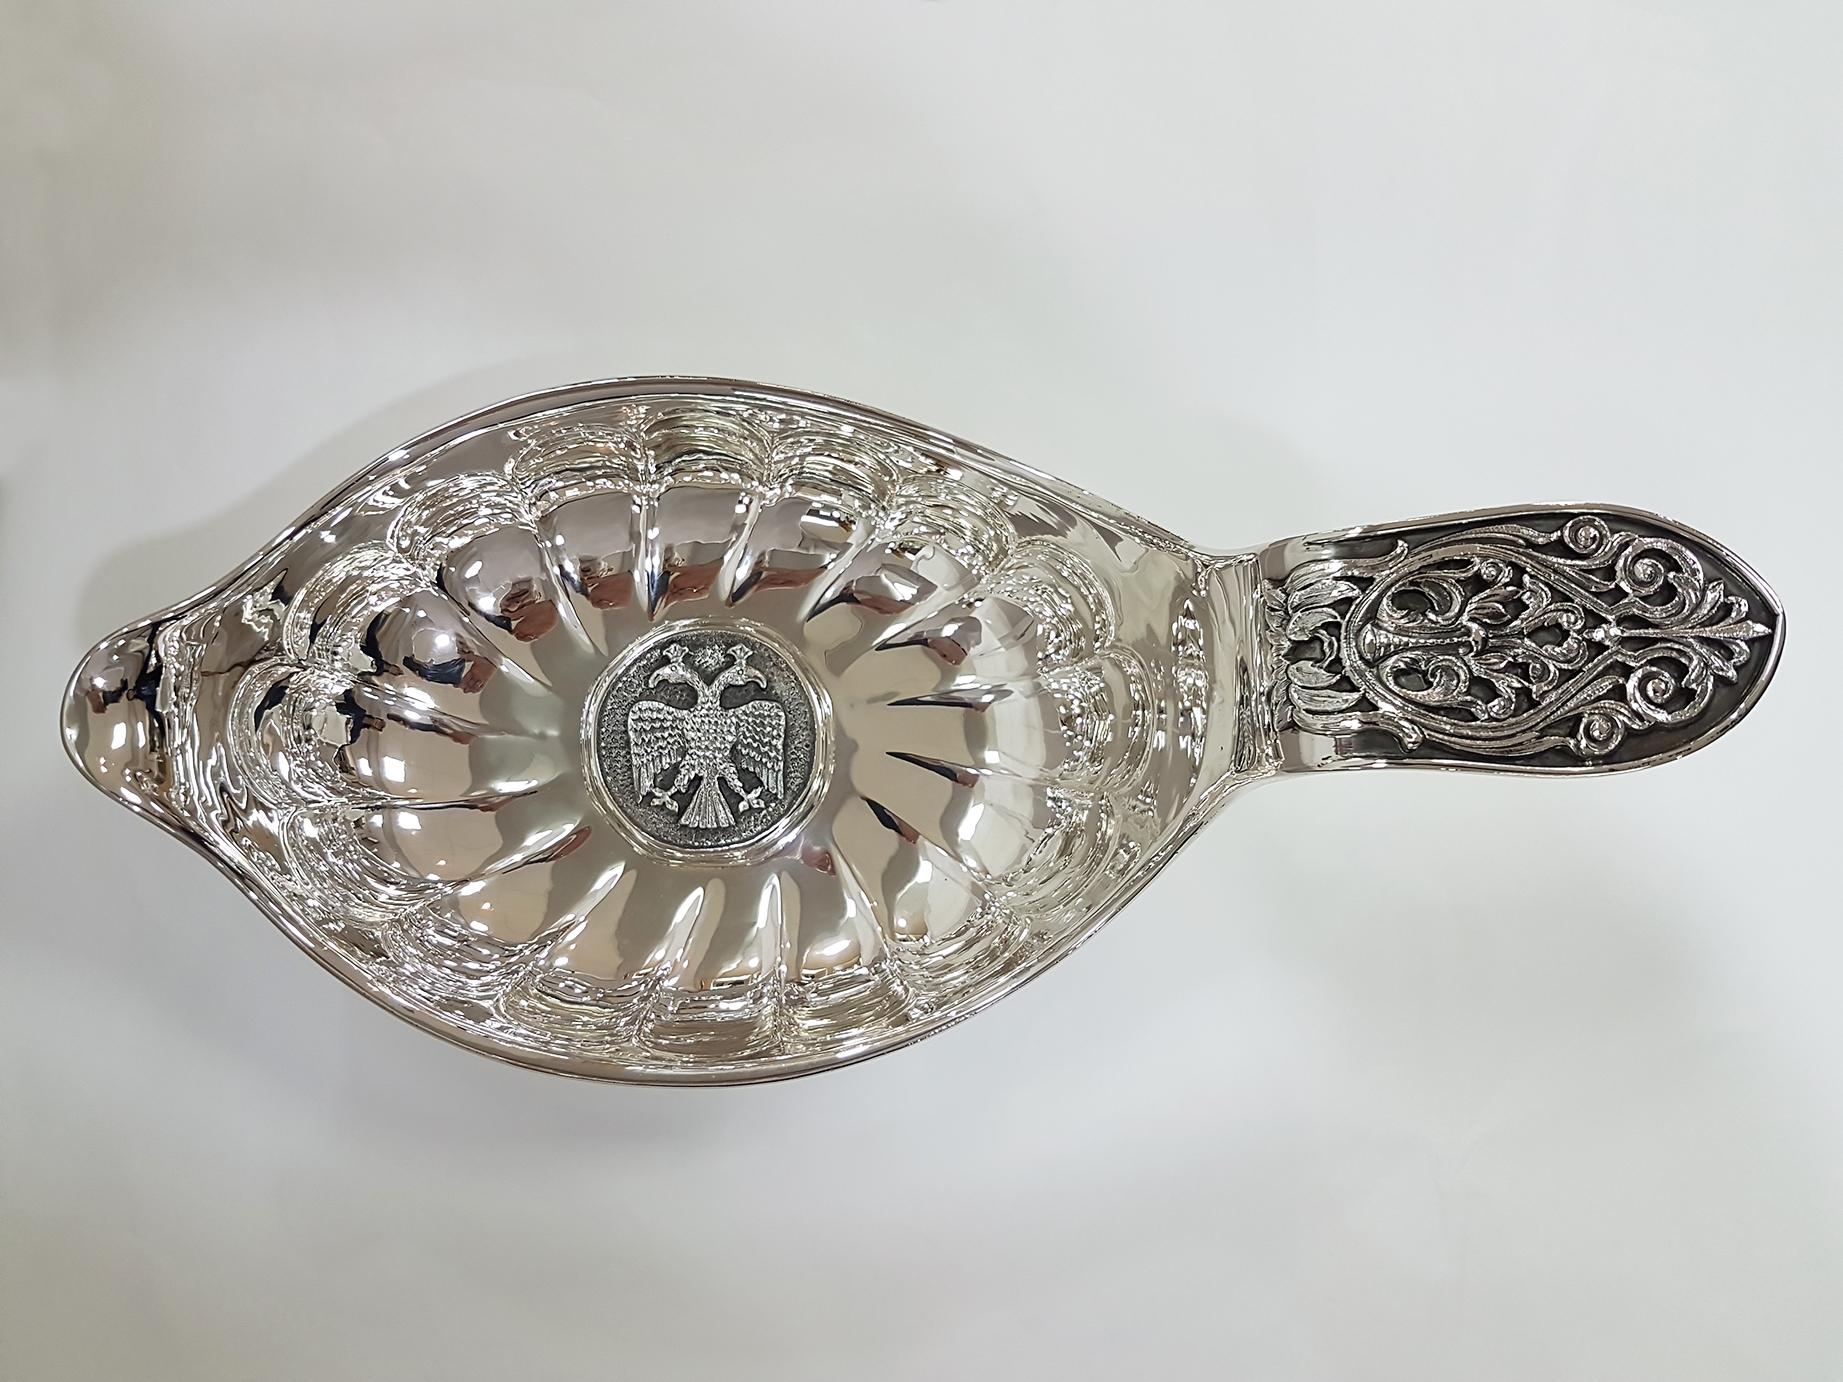 Solid 800 Silver Kovsh completely ceased and embossed by hand.
A medallion depicting a two-faced Royal eagle was placed in the centre of the bowl.
On the handle there is a frieze worked in fusion depicting volutes.

The Kovsh is a traditional